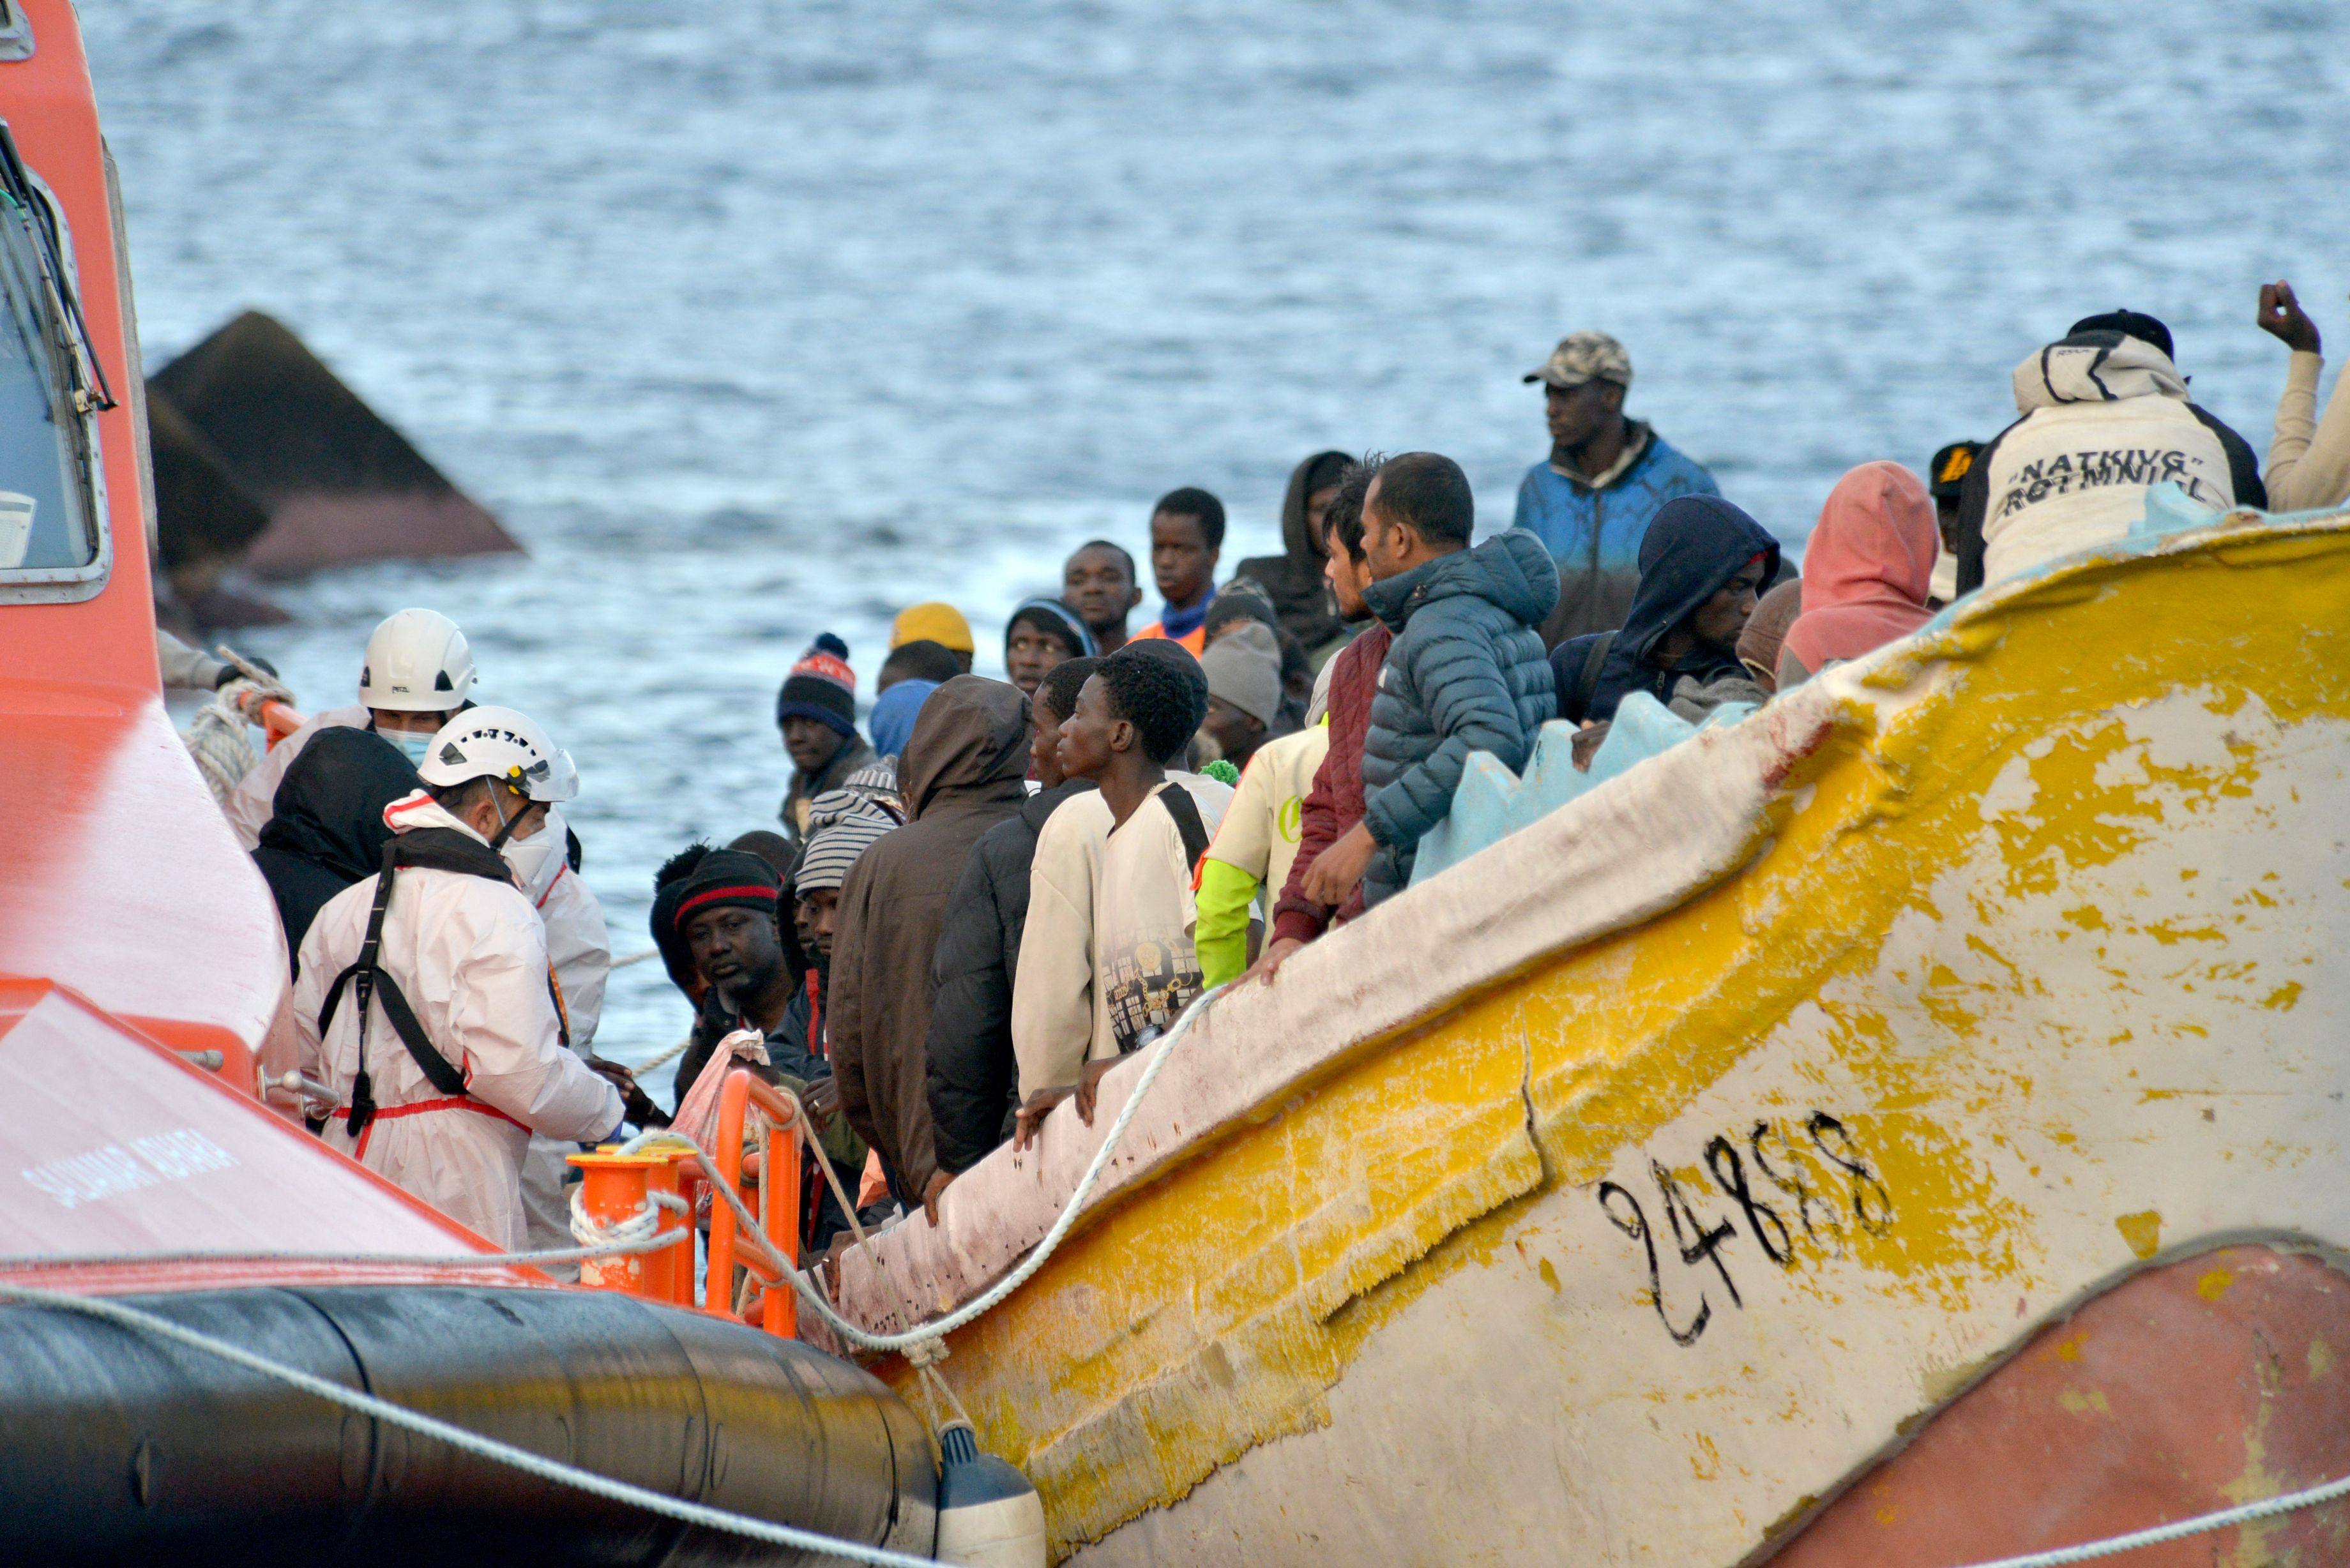 A ‘cayuco’ boat carrying 156 migrants arrives on the Canary Island of El Hierro, on December 15. The EU on Wednesday reached deal on ‘long overdue’ rules to manage migration and asylum. Photo: AFP